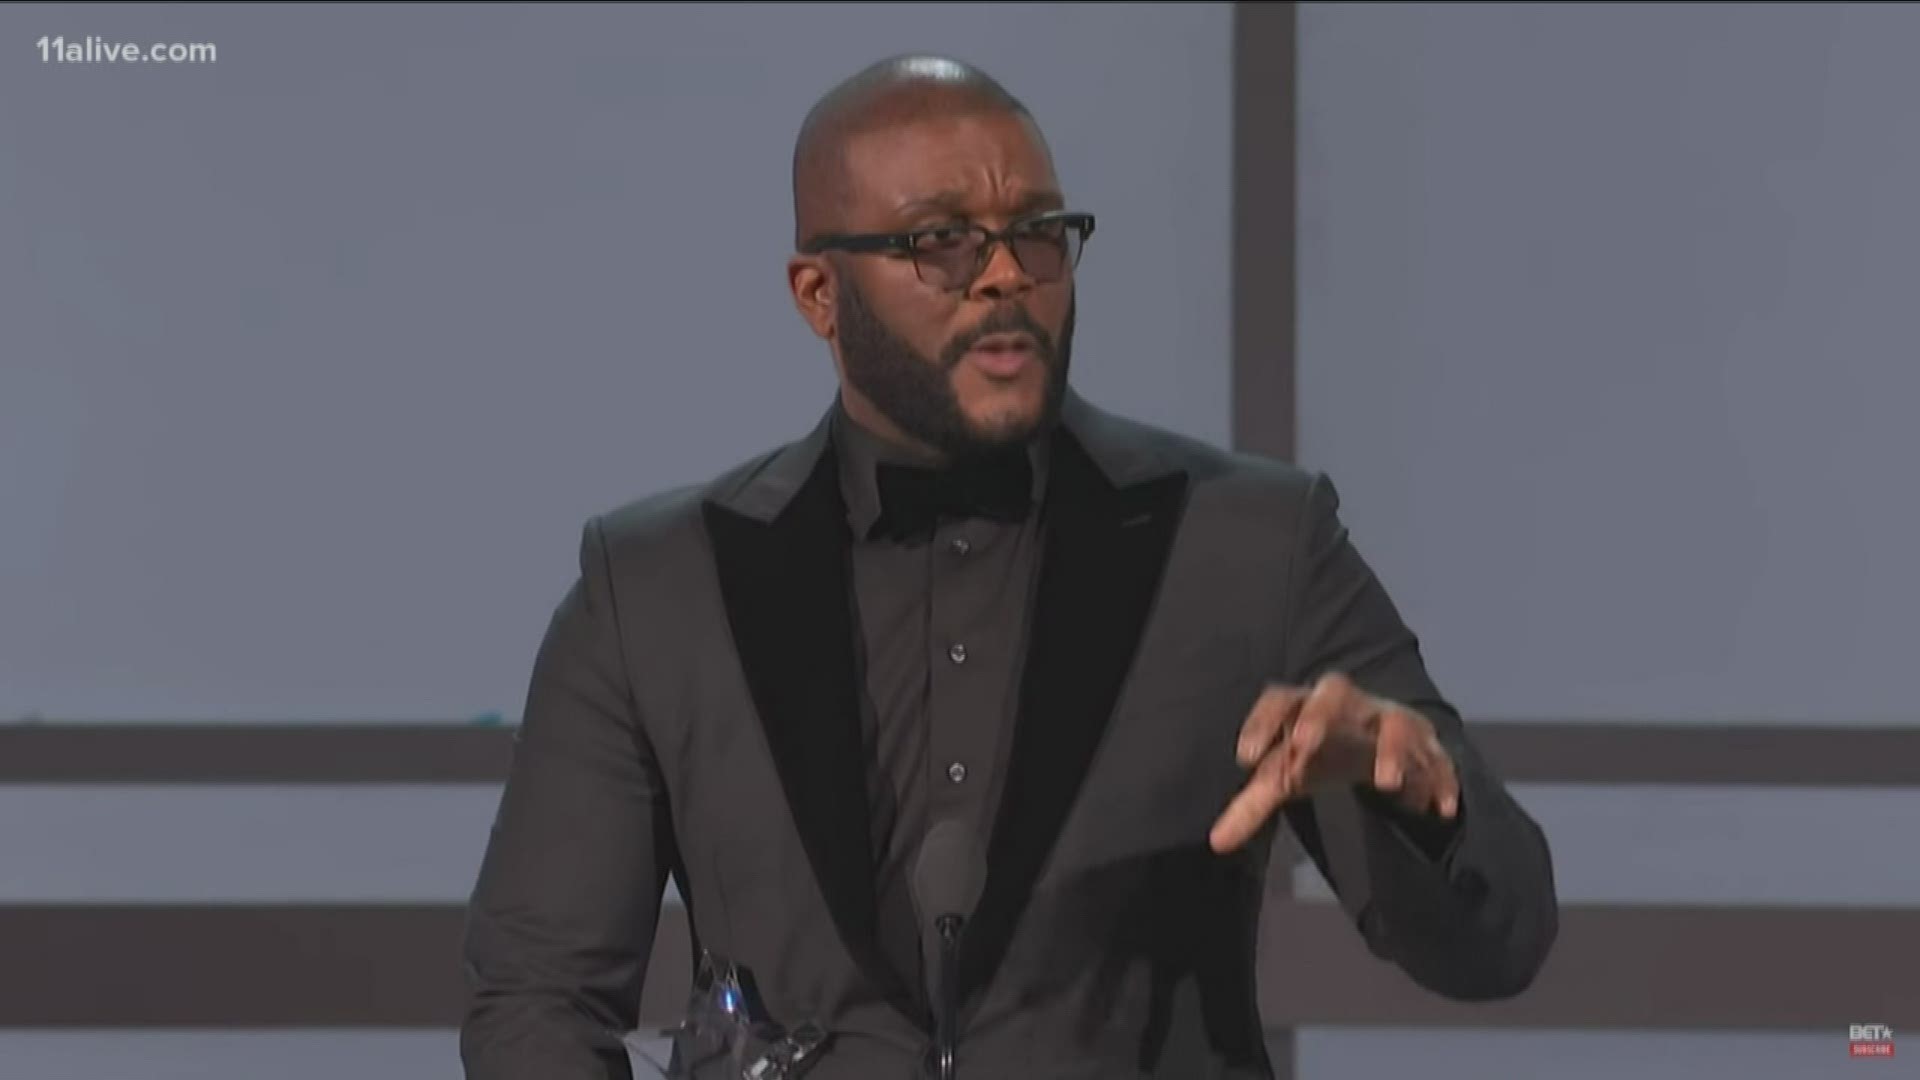 Tyler Perry won the Icon Award. Some loved his speech, others did not.